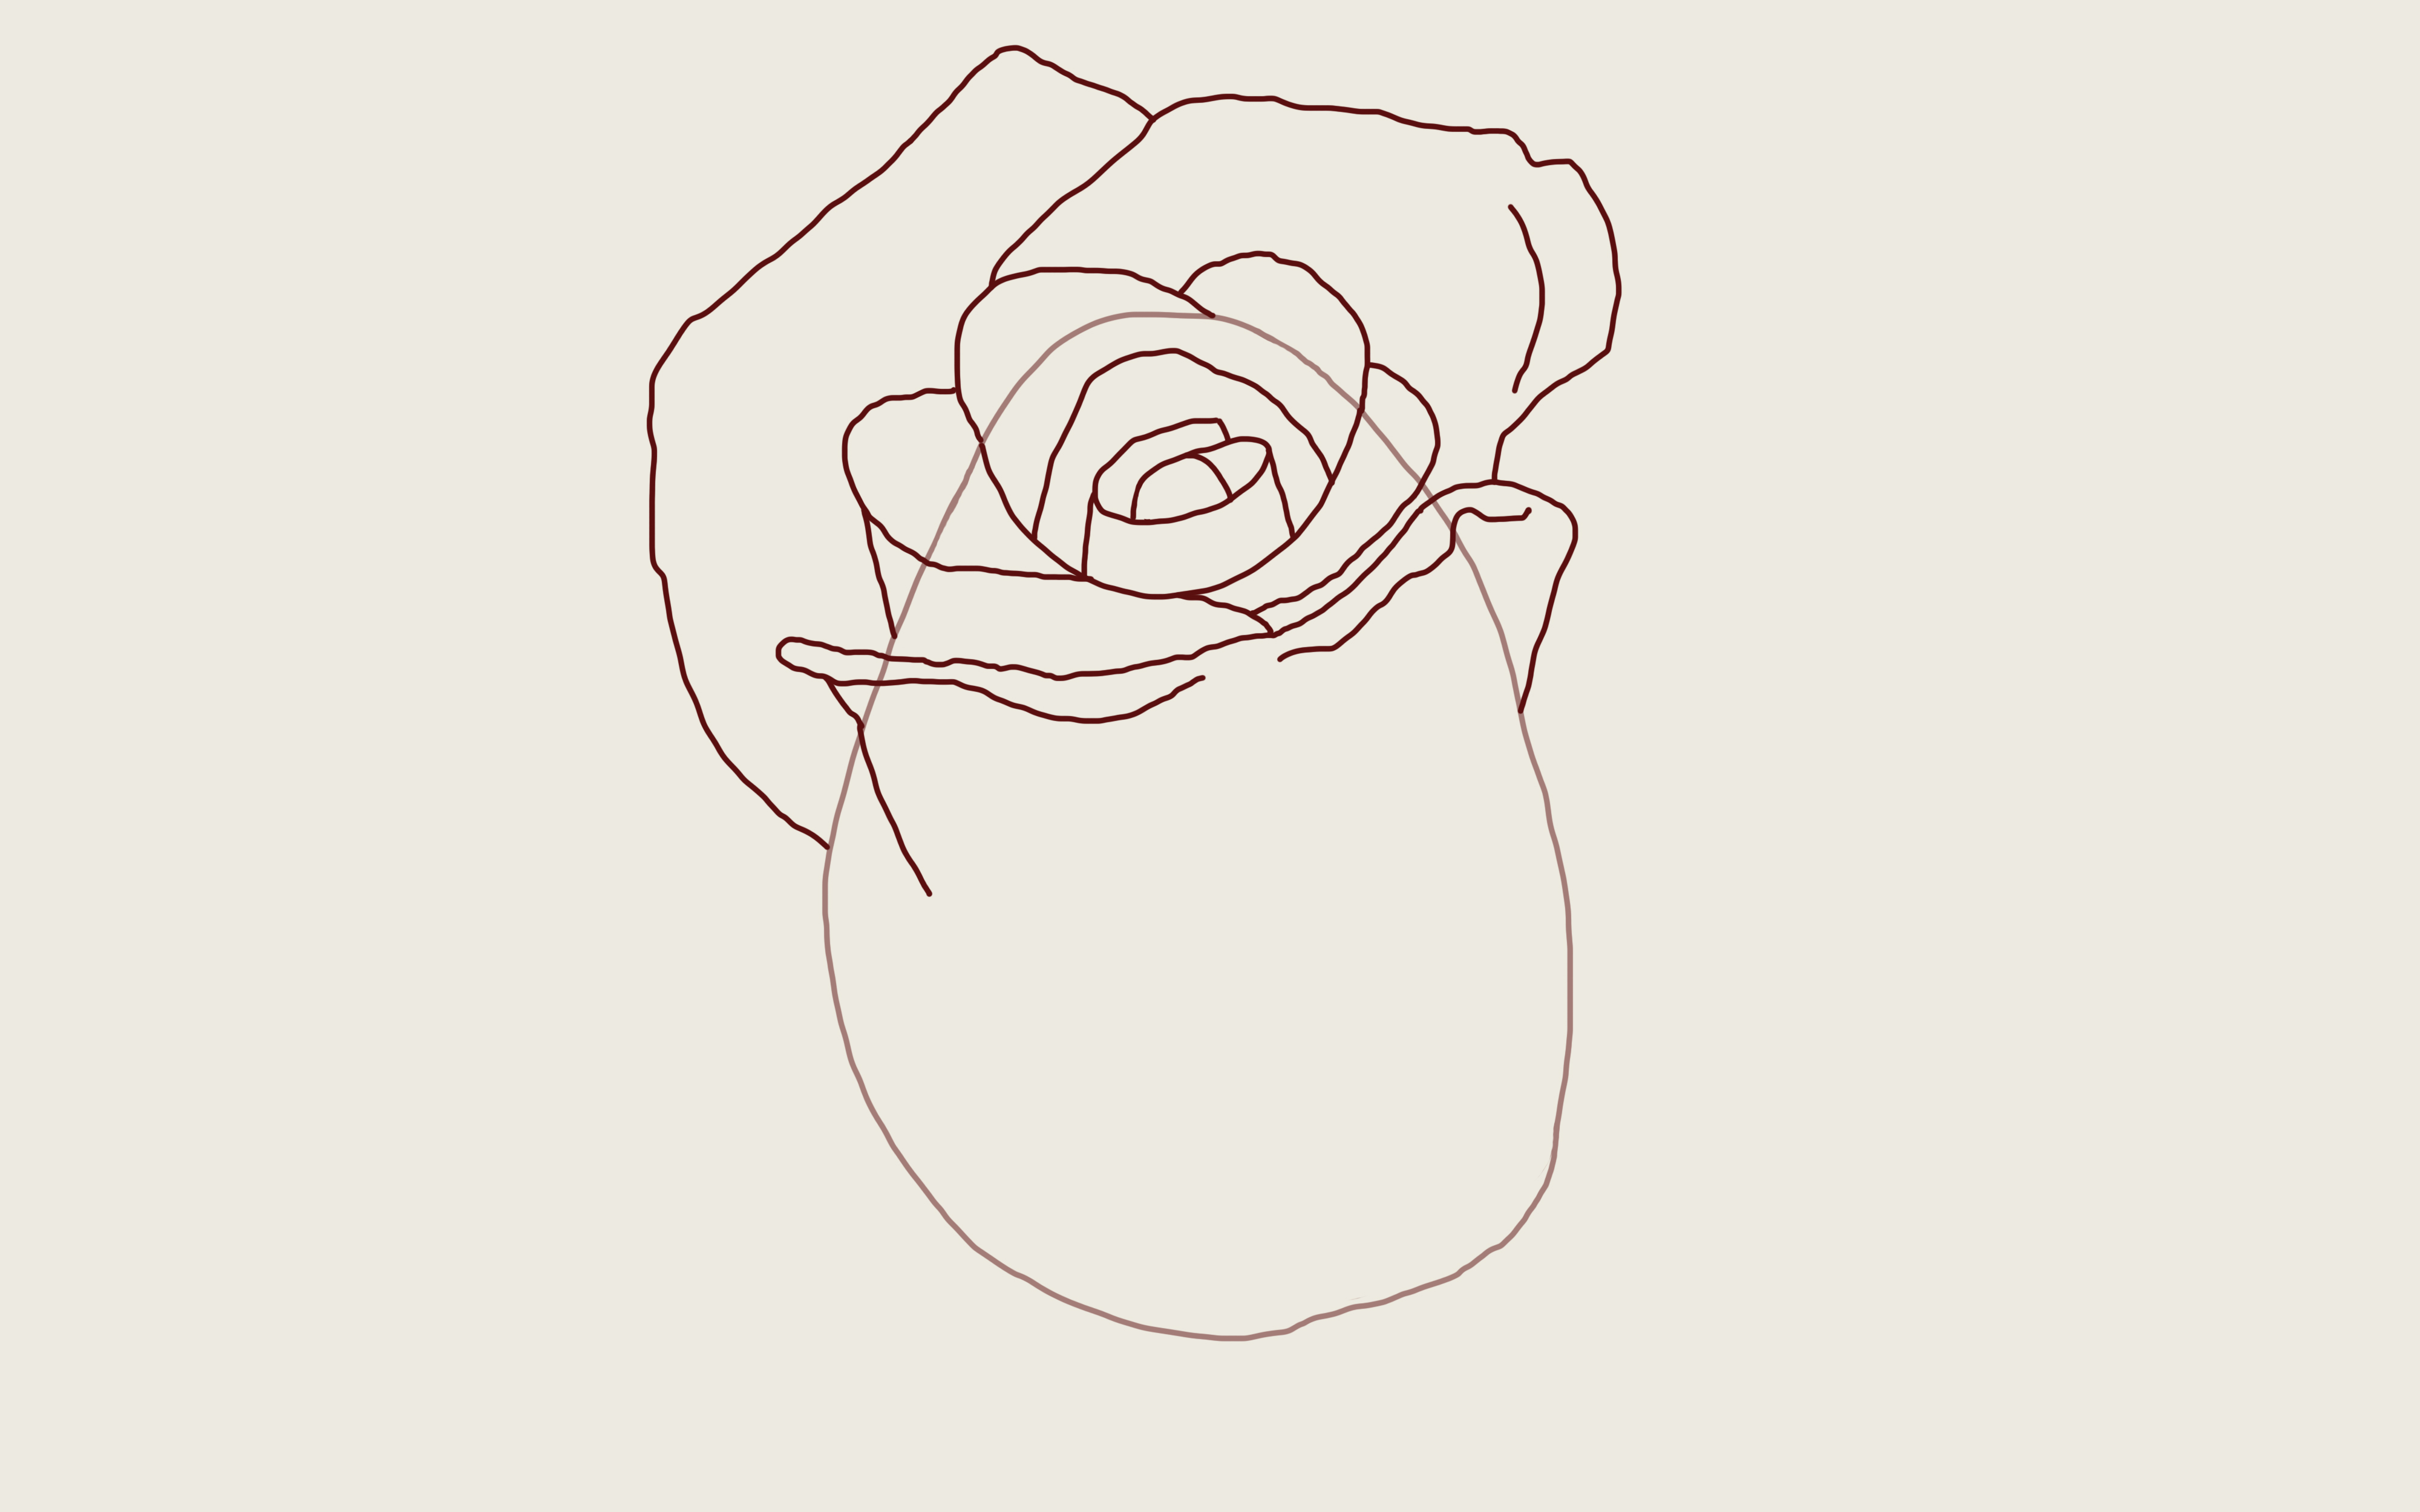 How to Draw a Rose : Step by Step for Beginners - JeyRam Drawing Tutorials